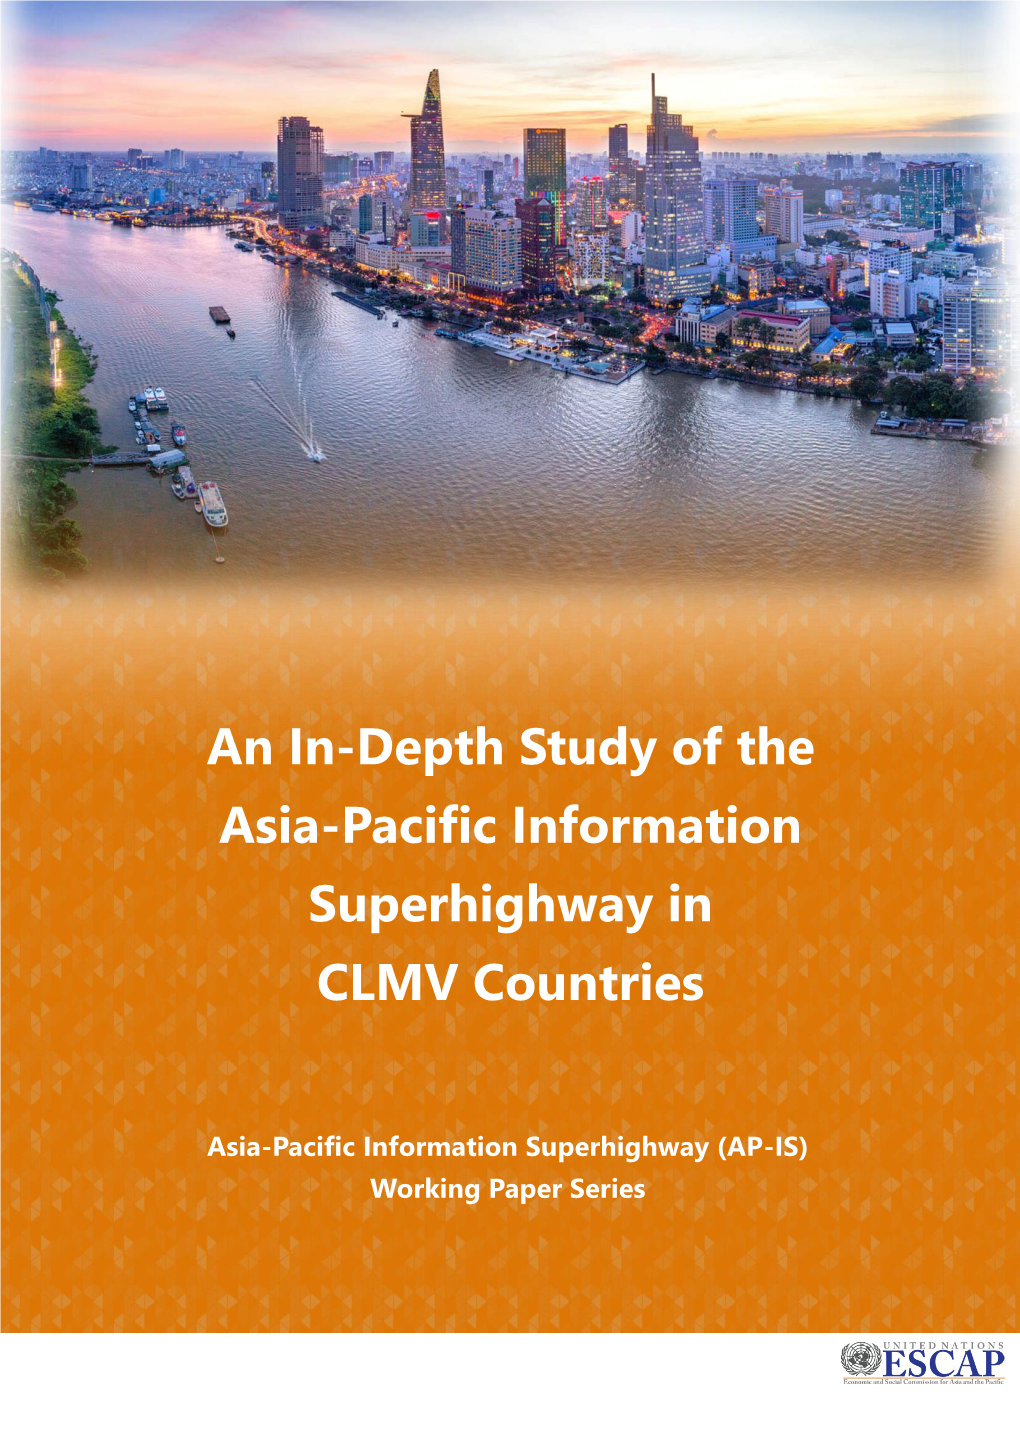 An In-Depth Study of the Asia-Pacific Information Superhighway in CLMV